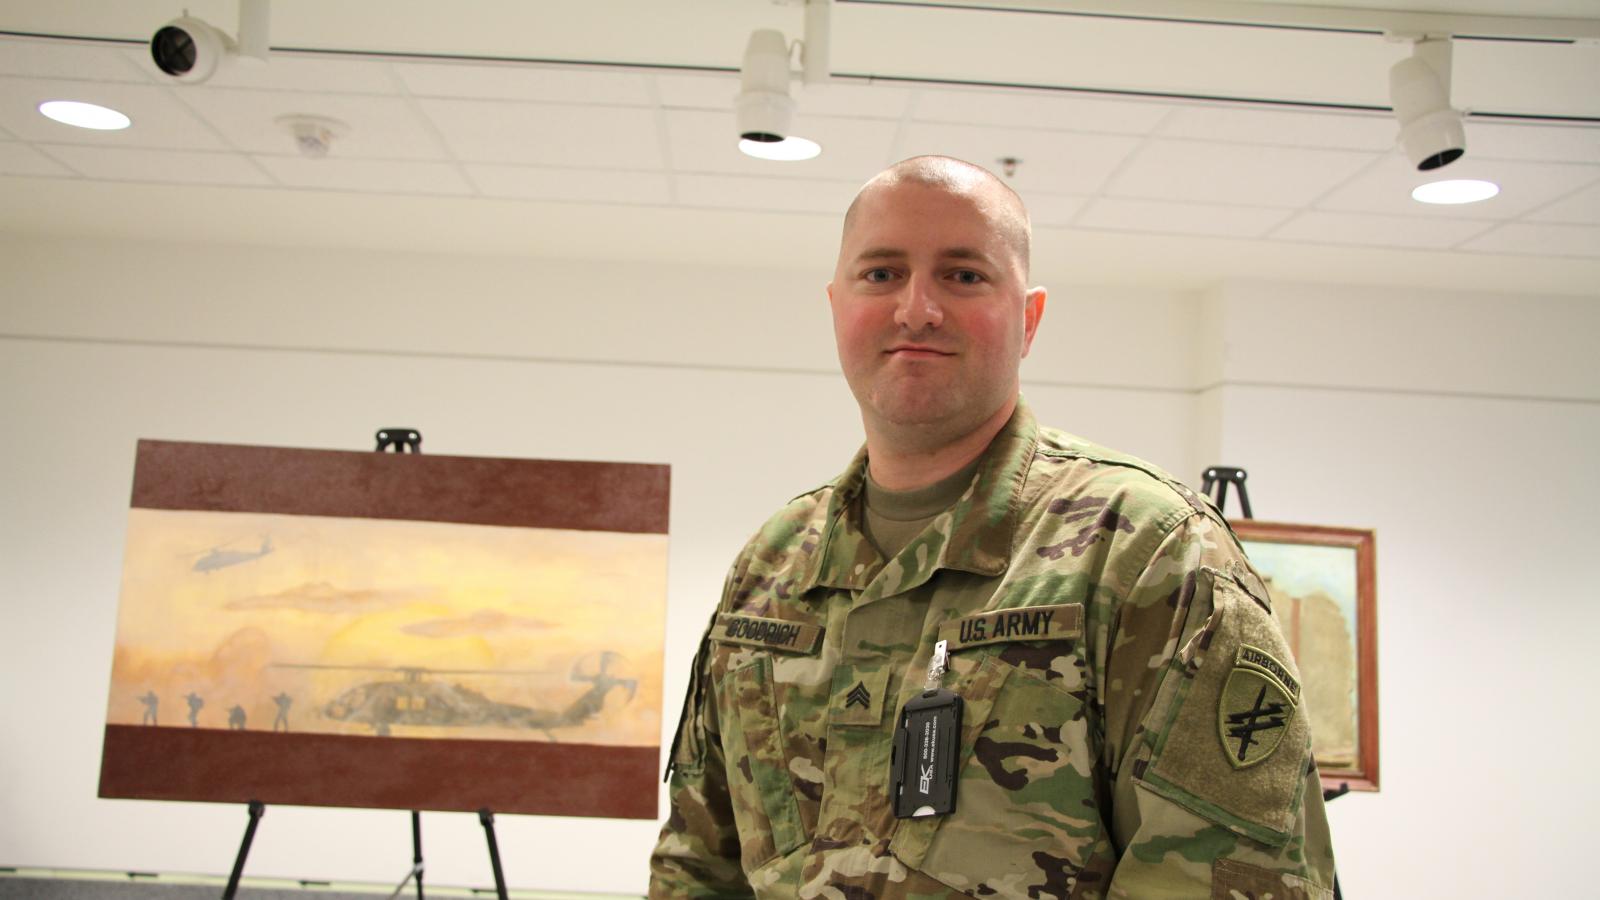 On left, painting of a grounded helicopter against an orange sky, to the right, a man in camouflage.